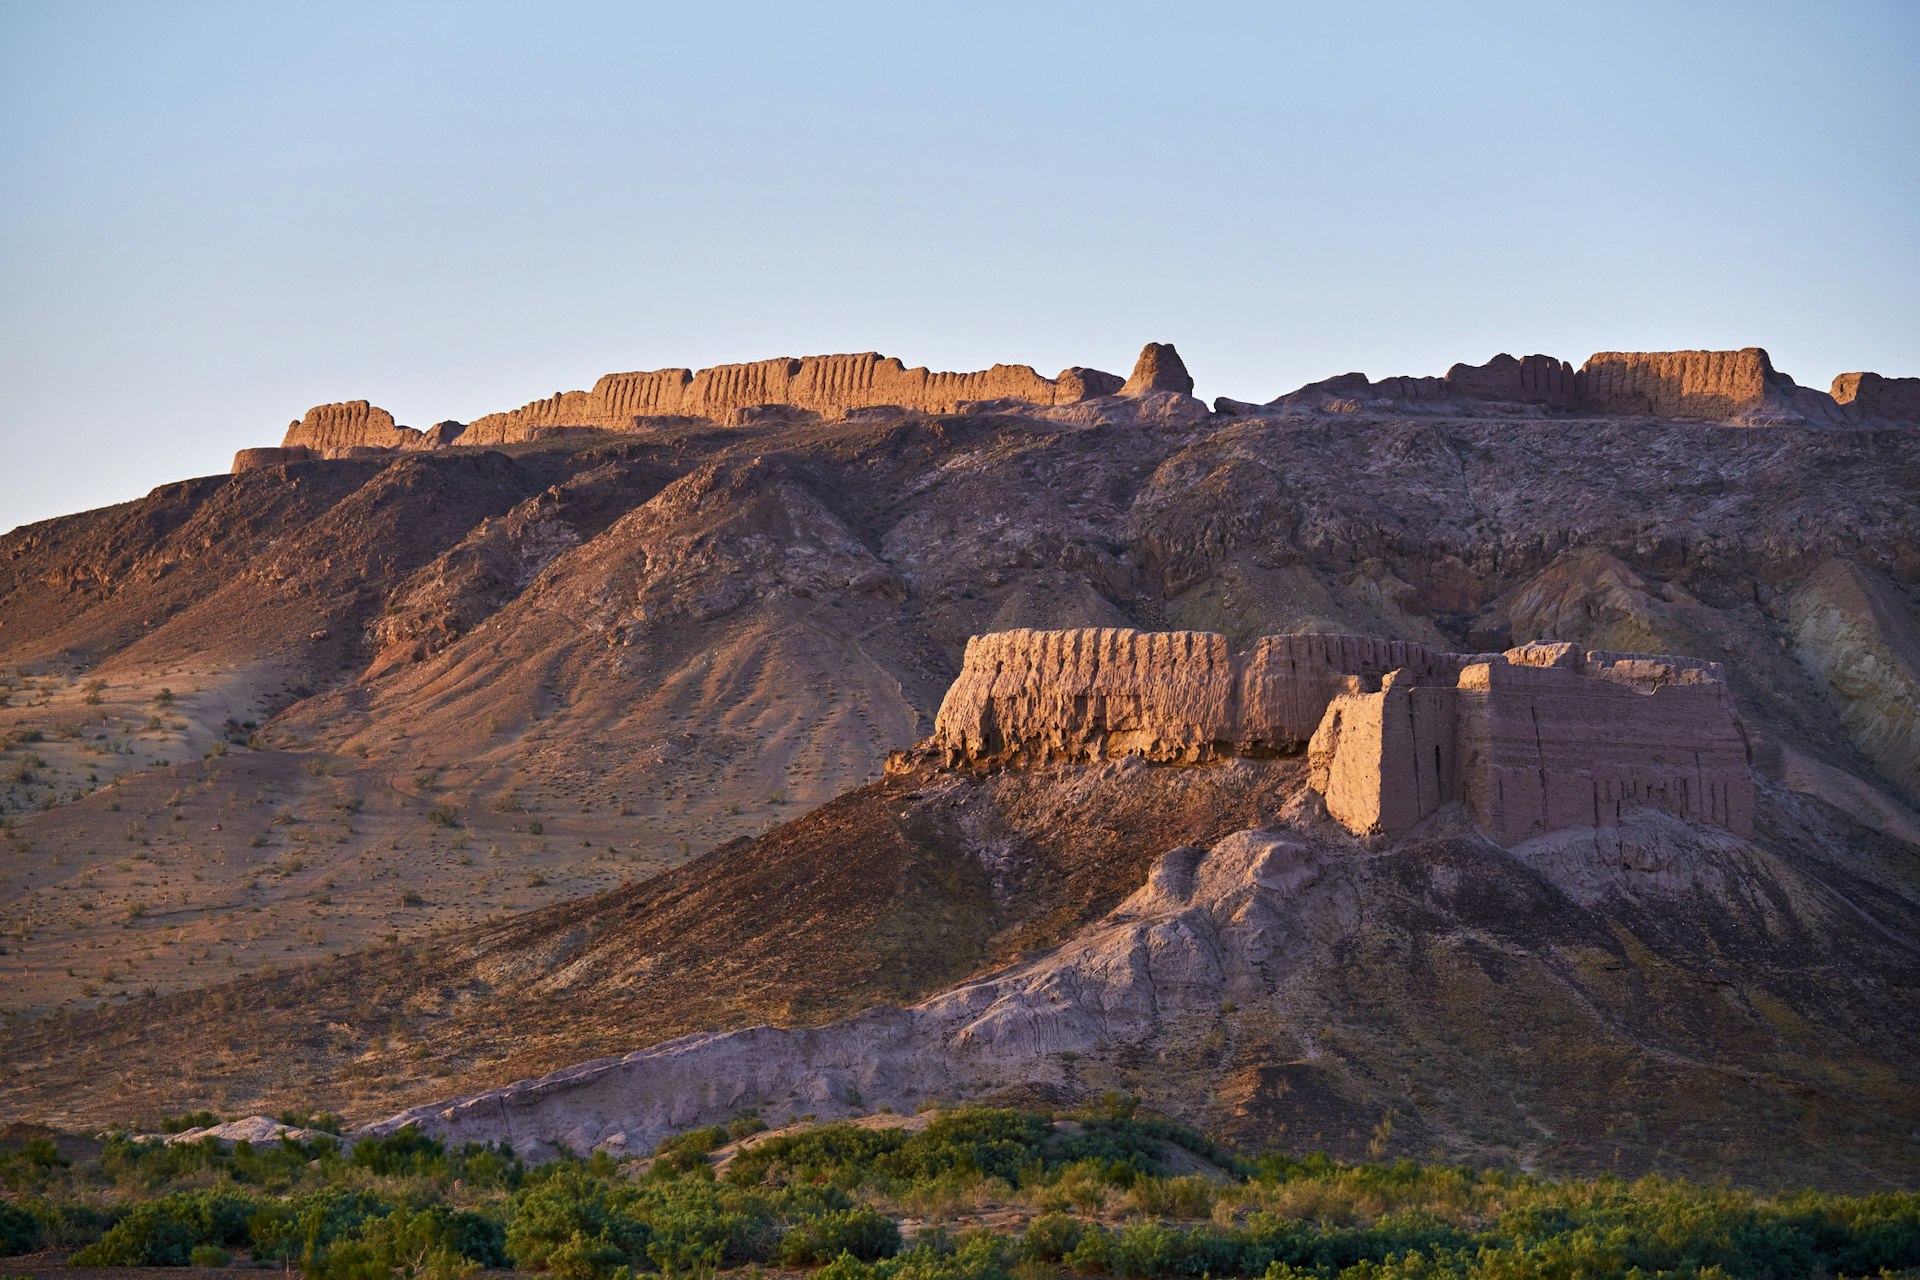 A red-stone ruined medieval fortress stands on the top of a cliff in a desert area